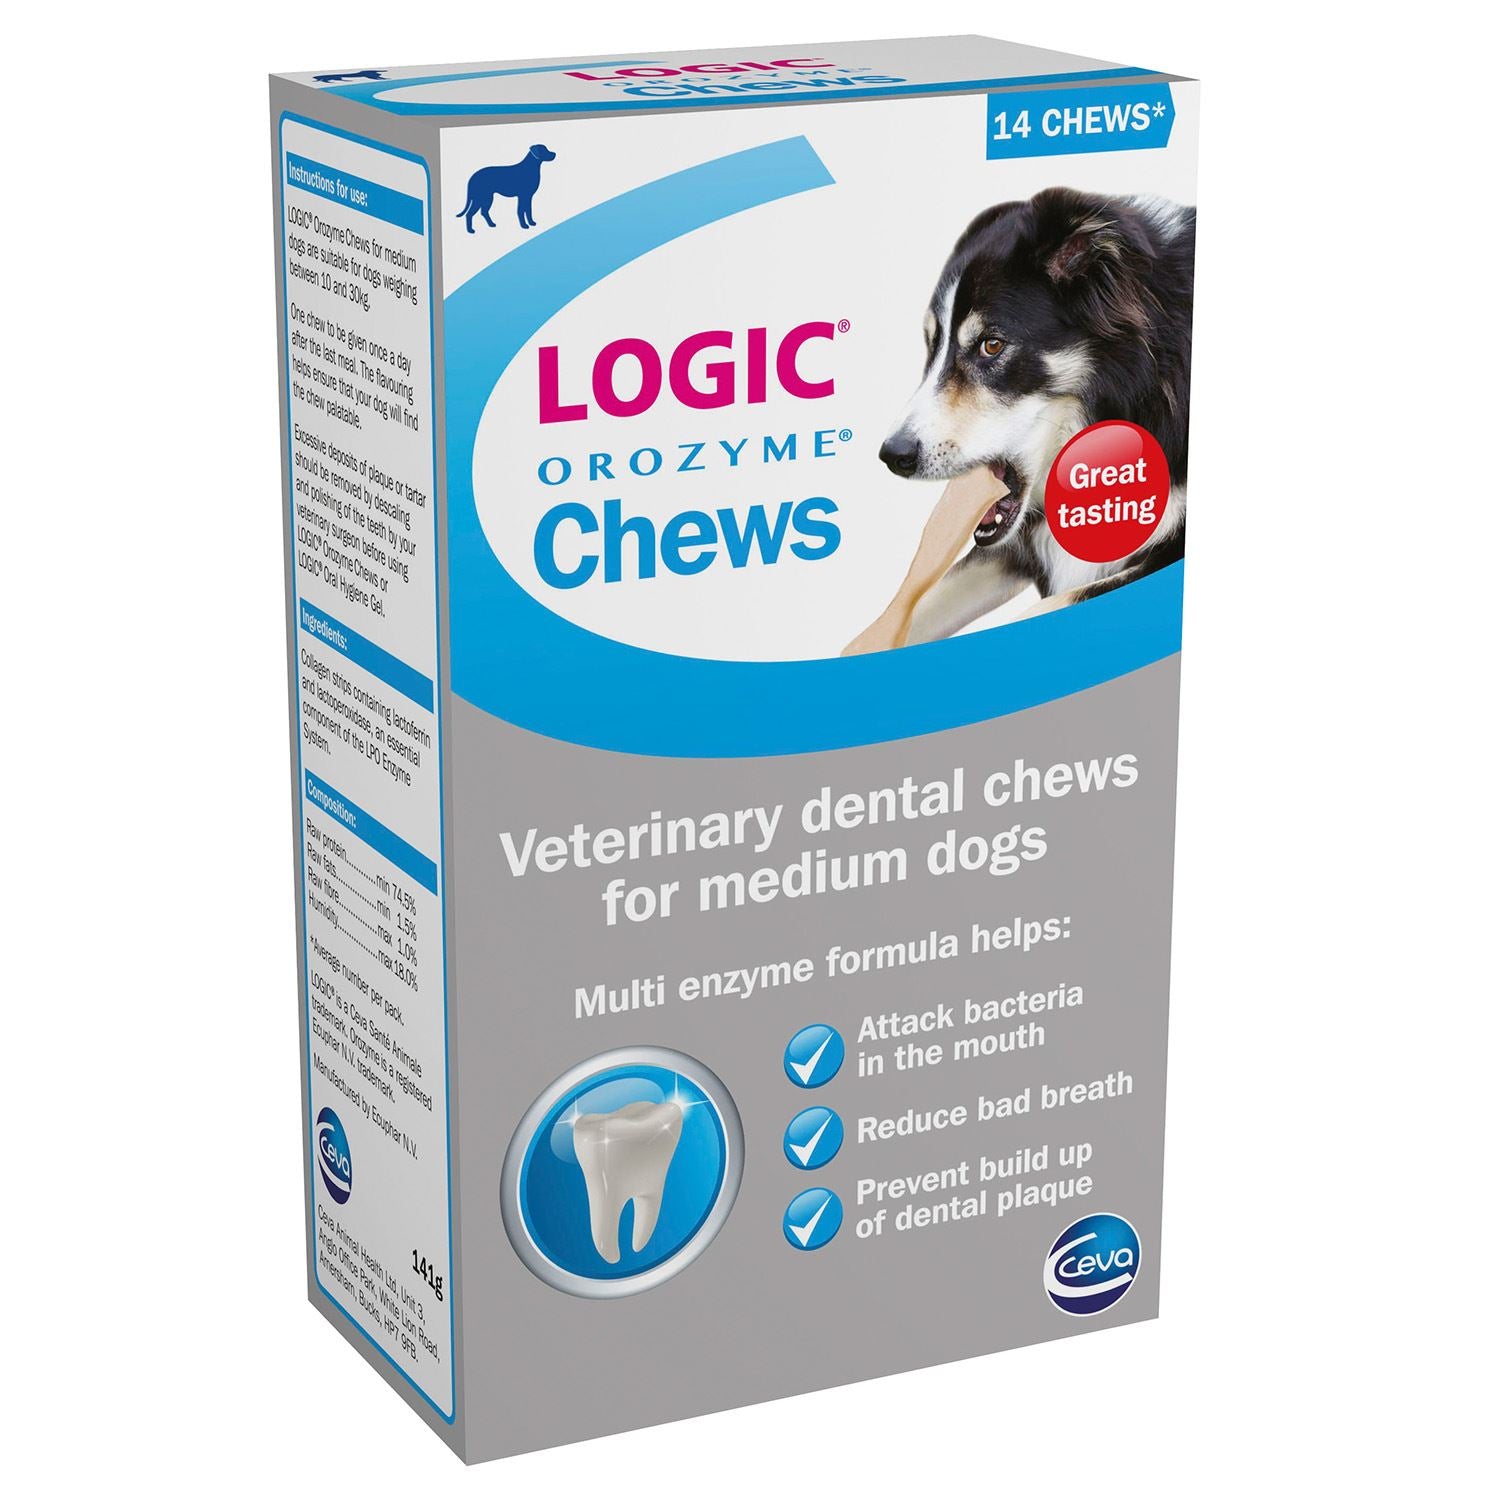 Logic Orozyme Chews For Medium Dogs - Just Horse Riders